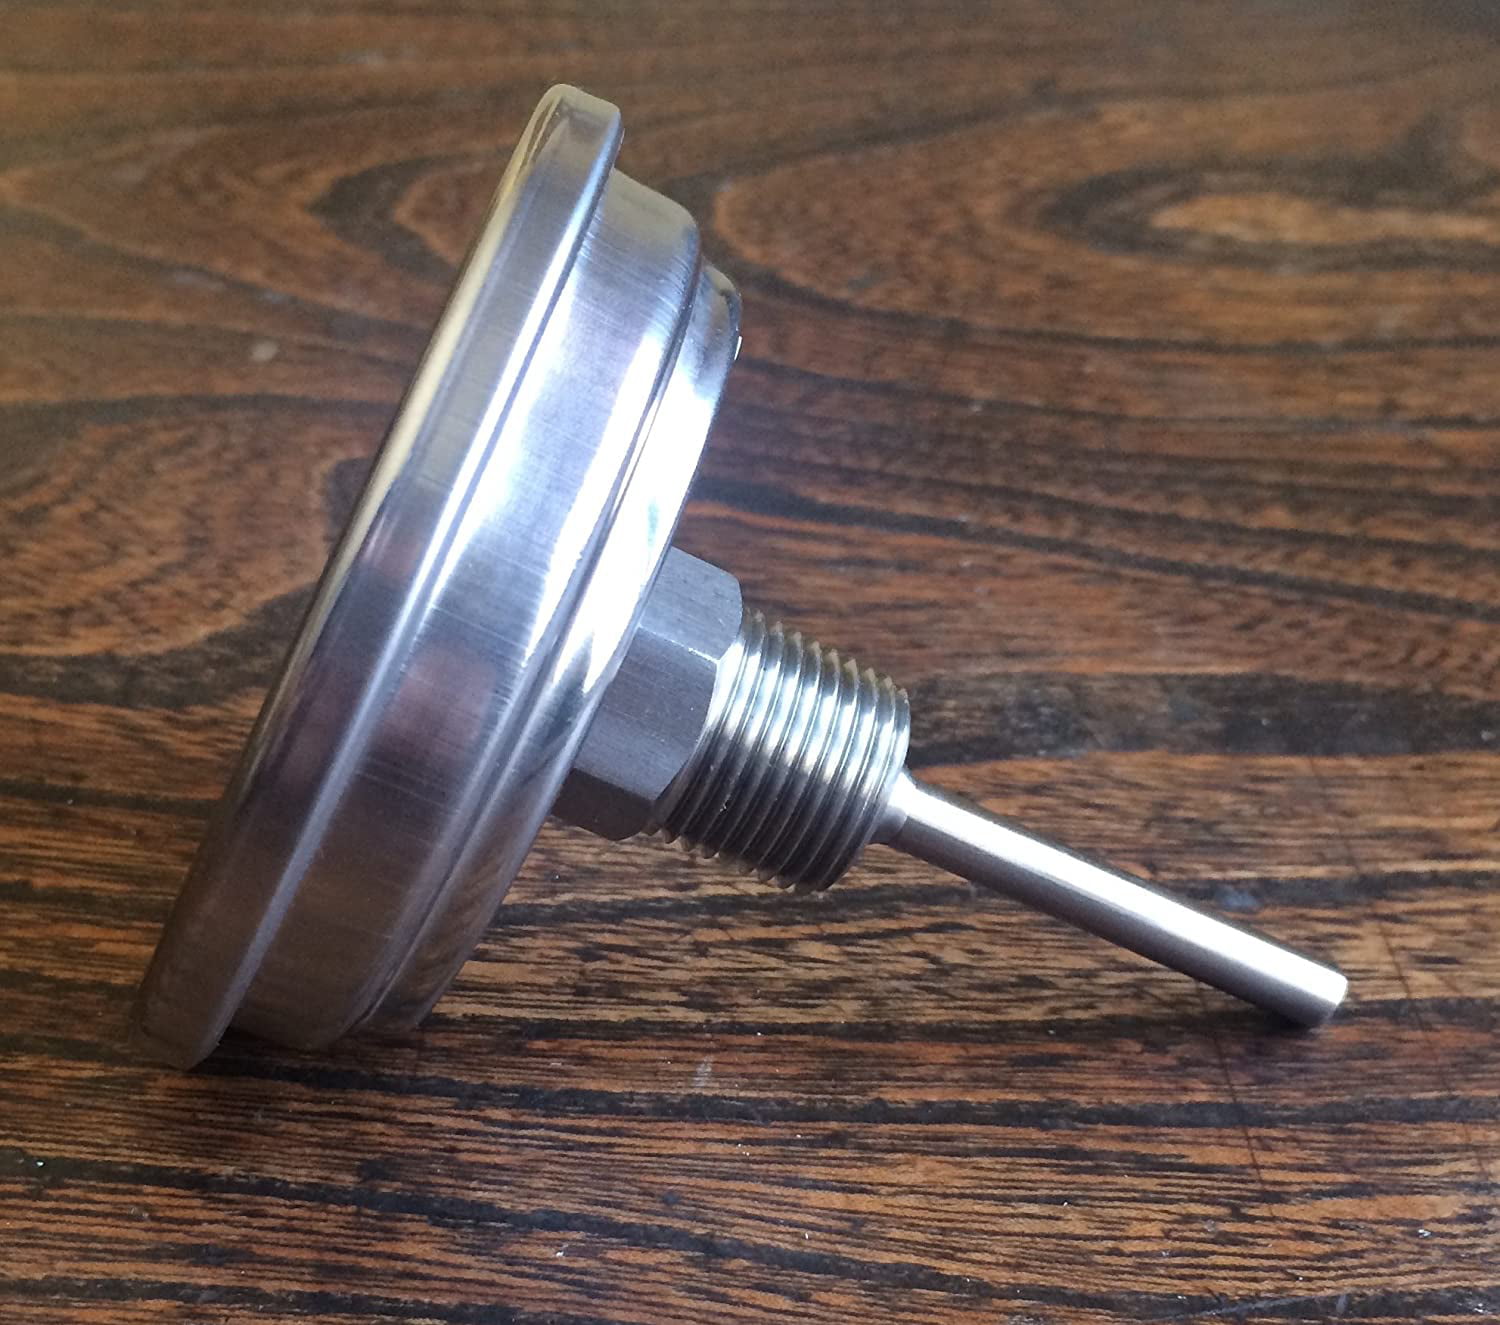 1/2" NPT Threaded Stainless Steel Thermometer for a Moonshine Still Condenser 